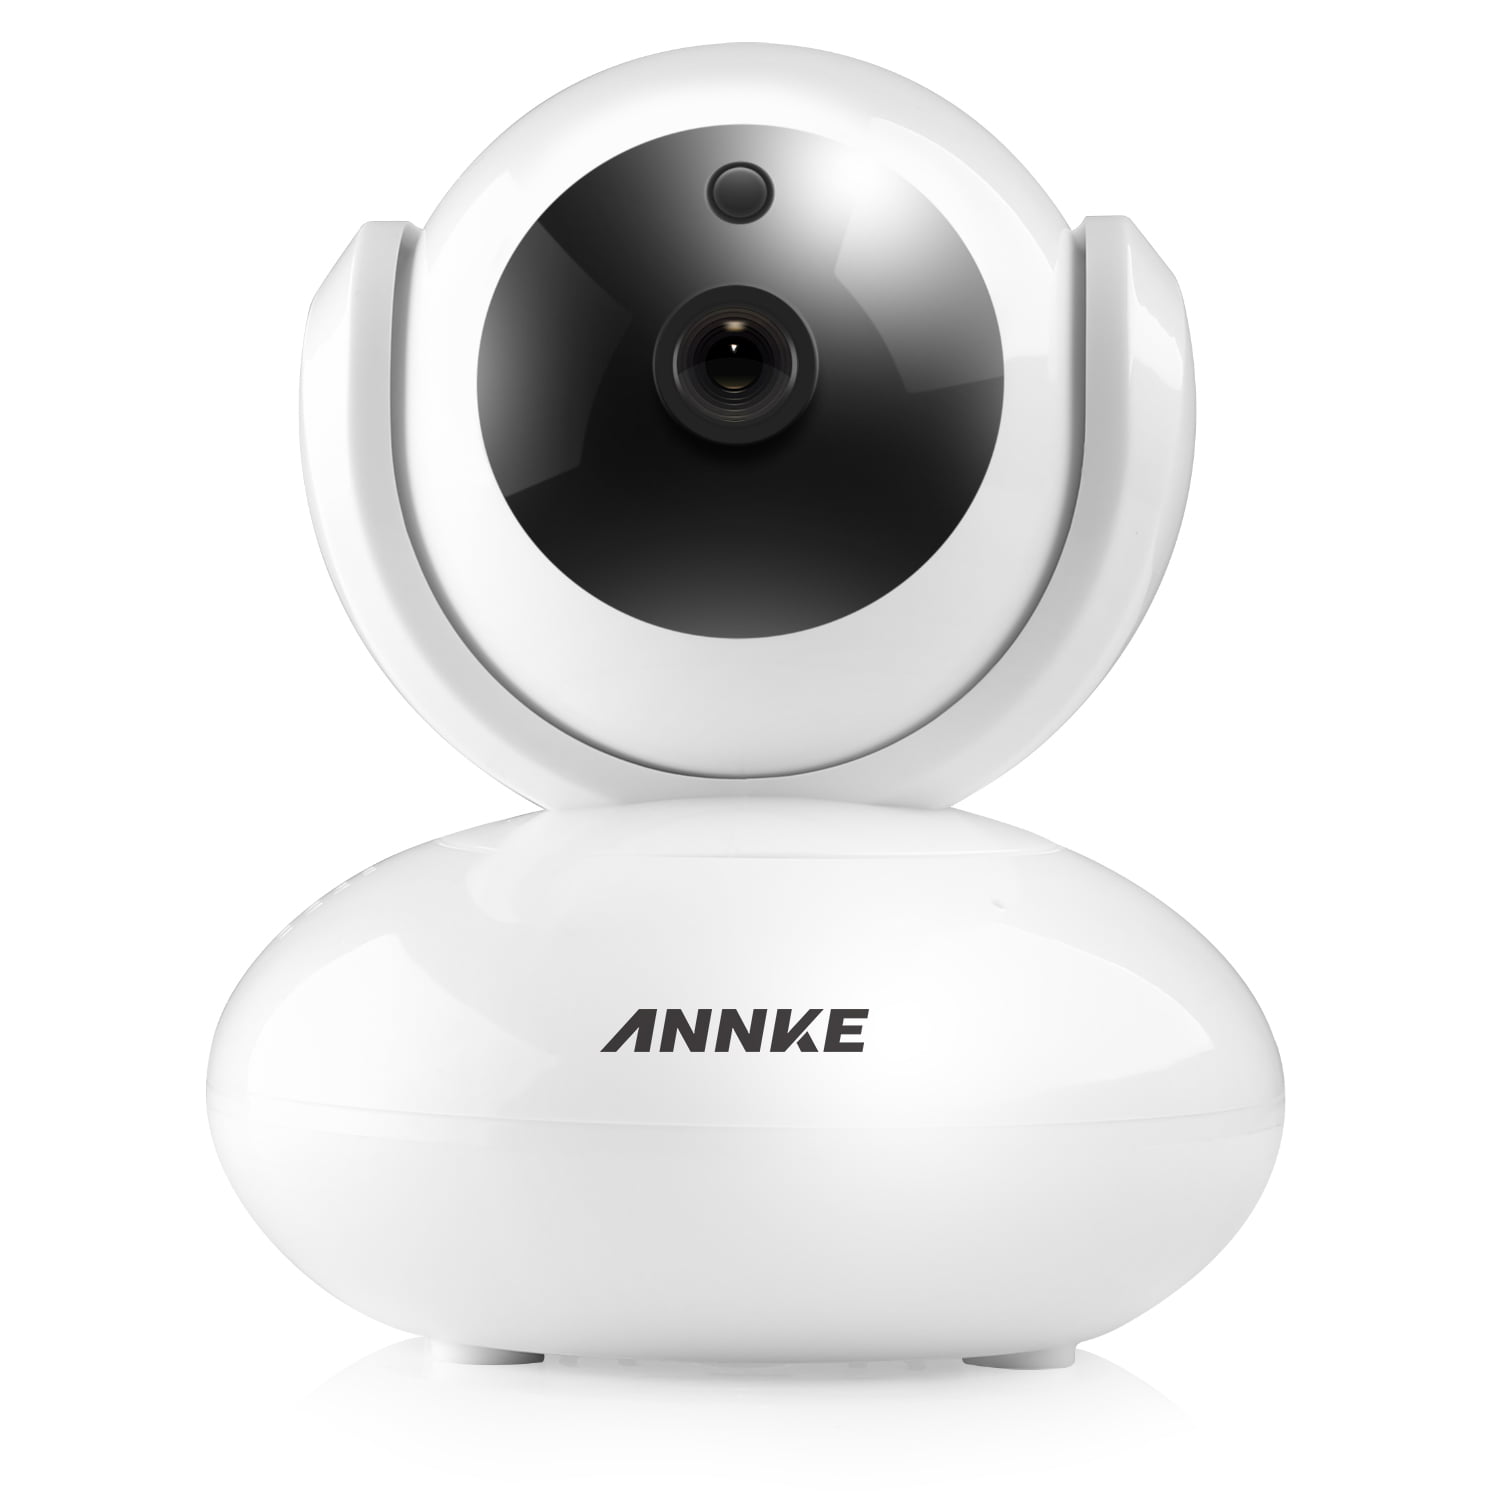 ANNKE HD 1080p Wireless Pan/Tilt/Zoom IP Camera with 2-Way Audio and